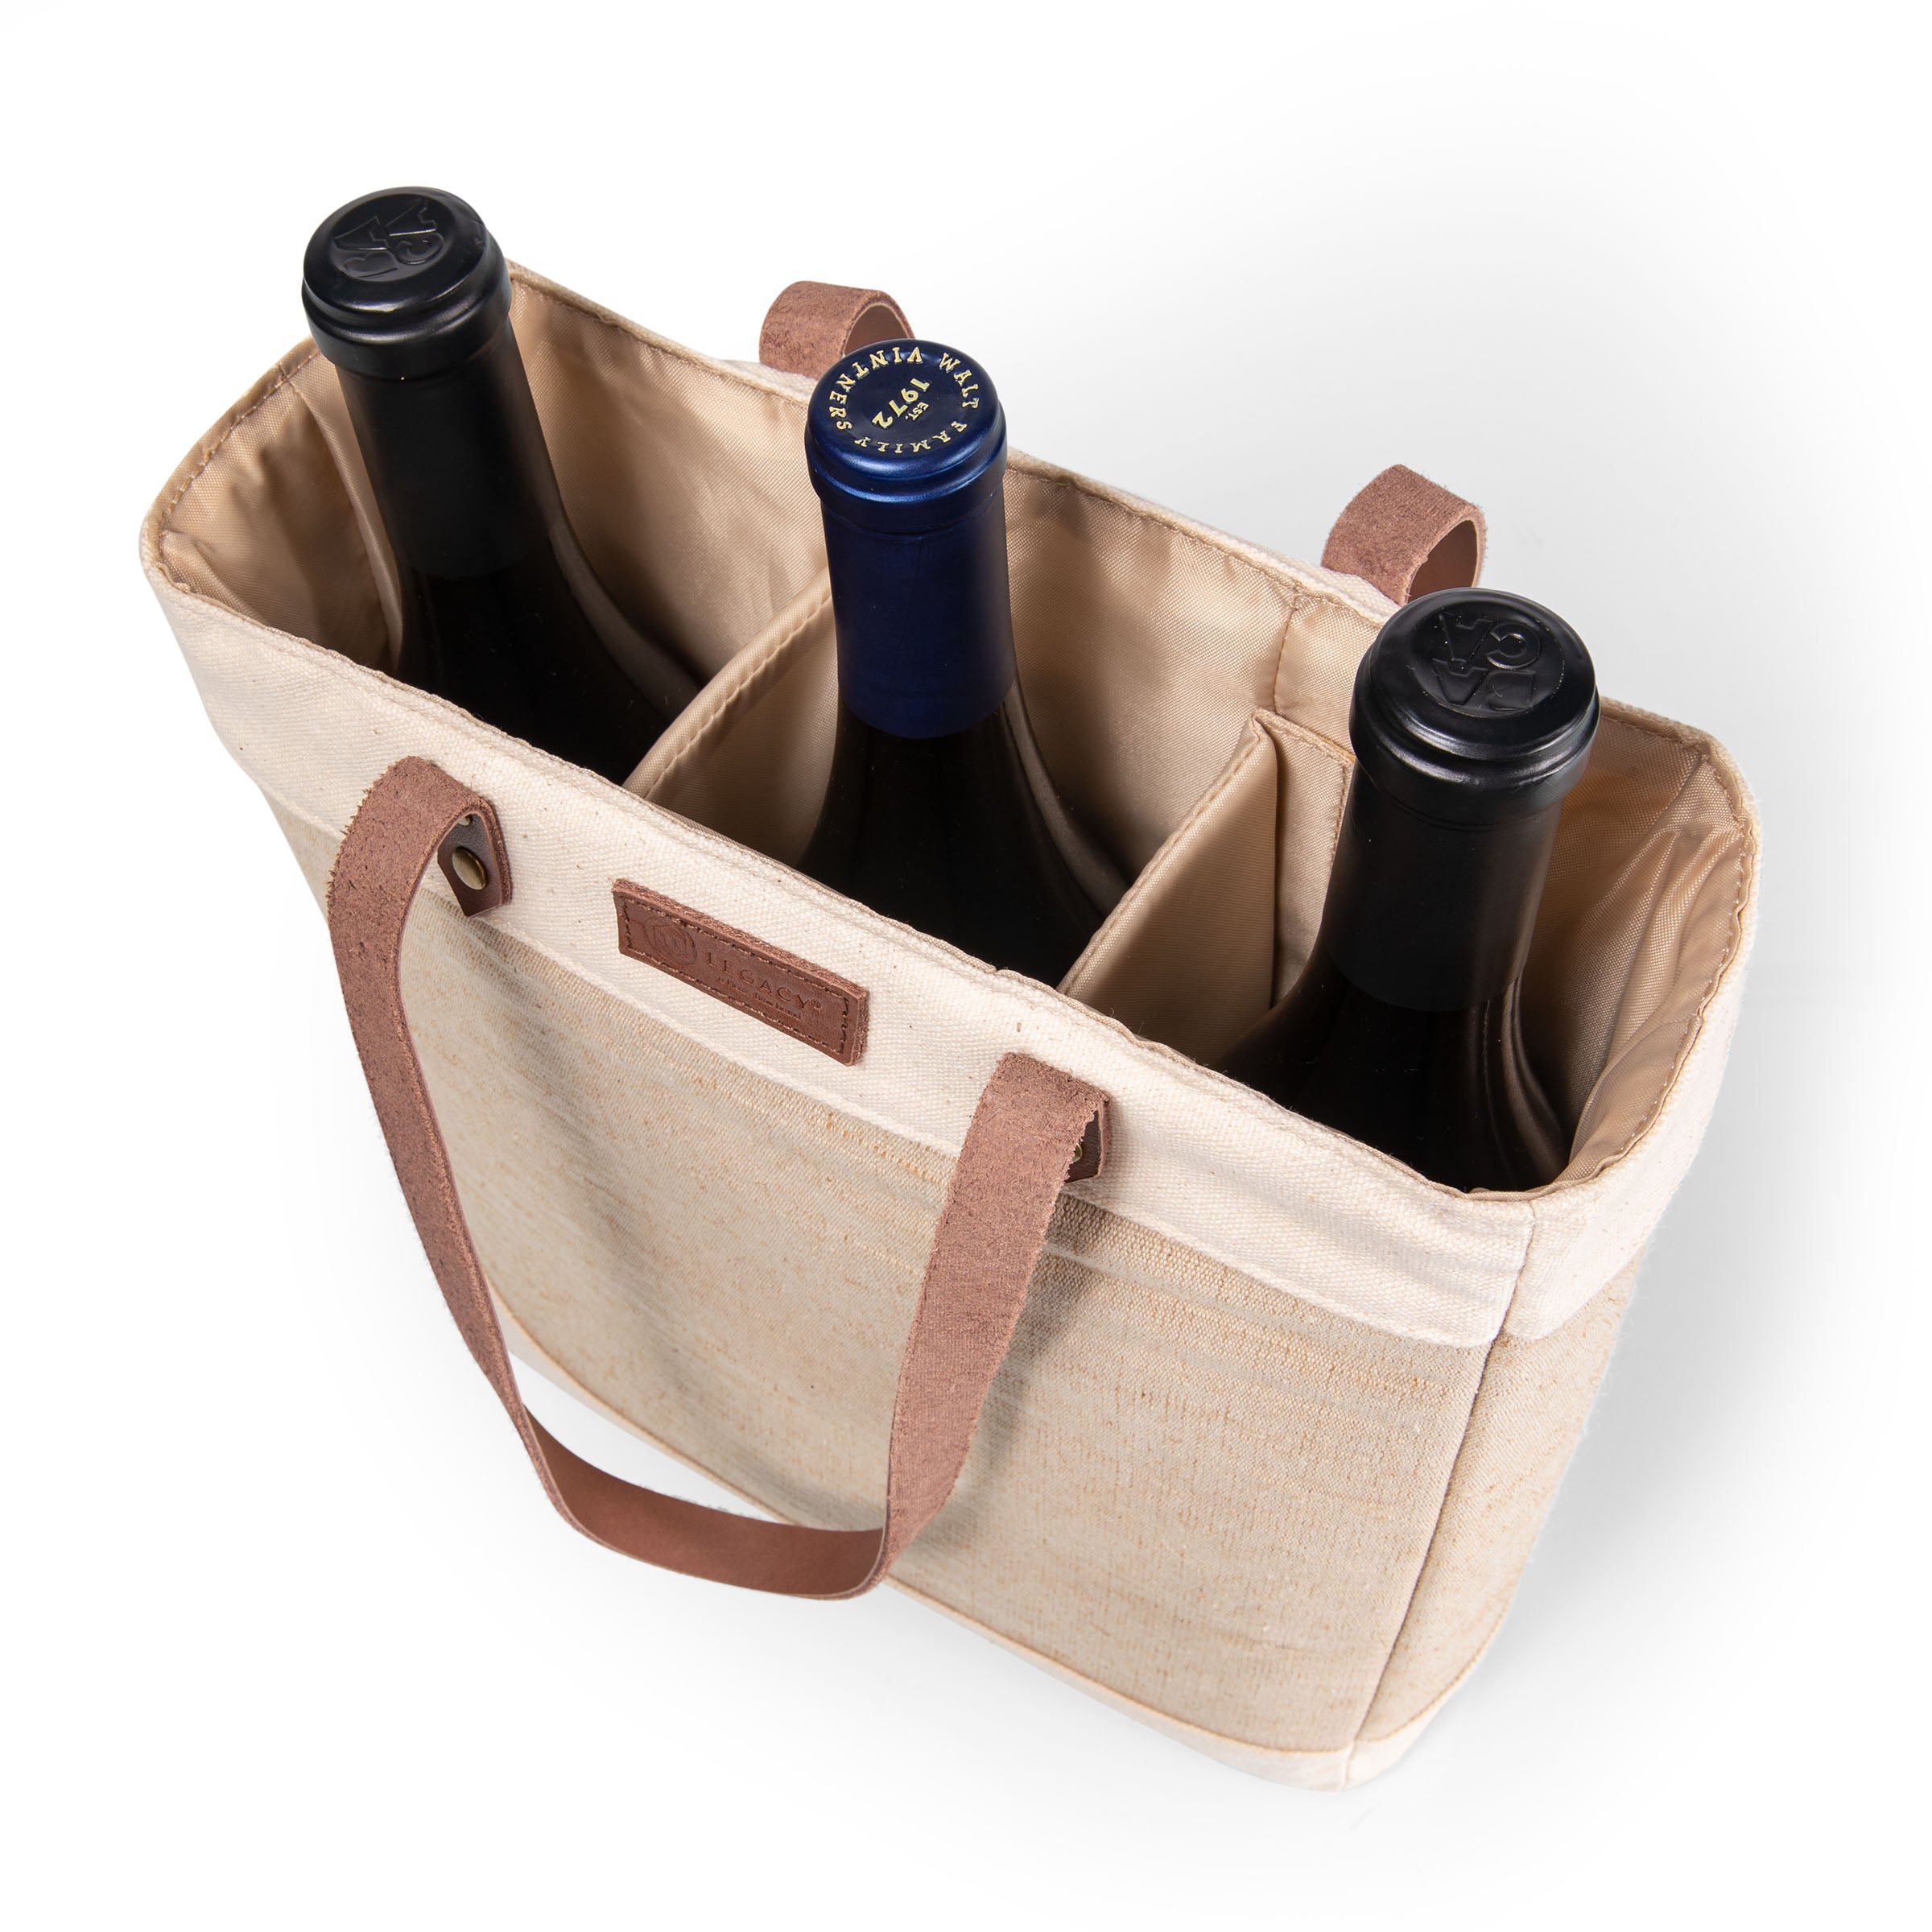 Officially Licensed NCAA 2-Bottle Insulated Wine Cooler Bag - Virginia